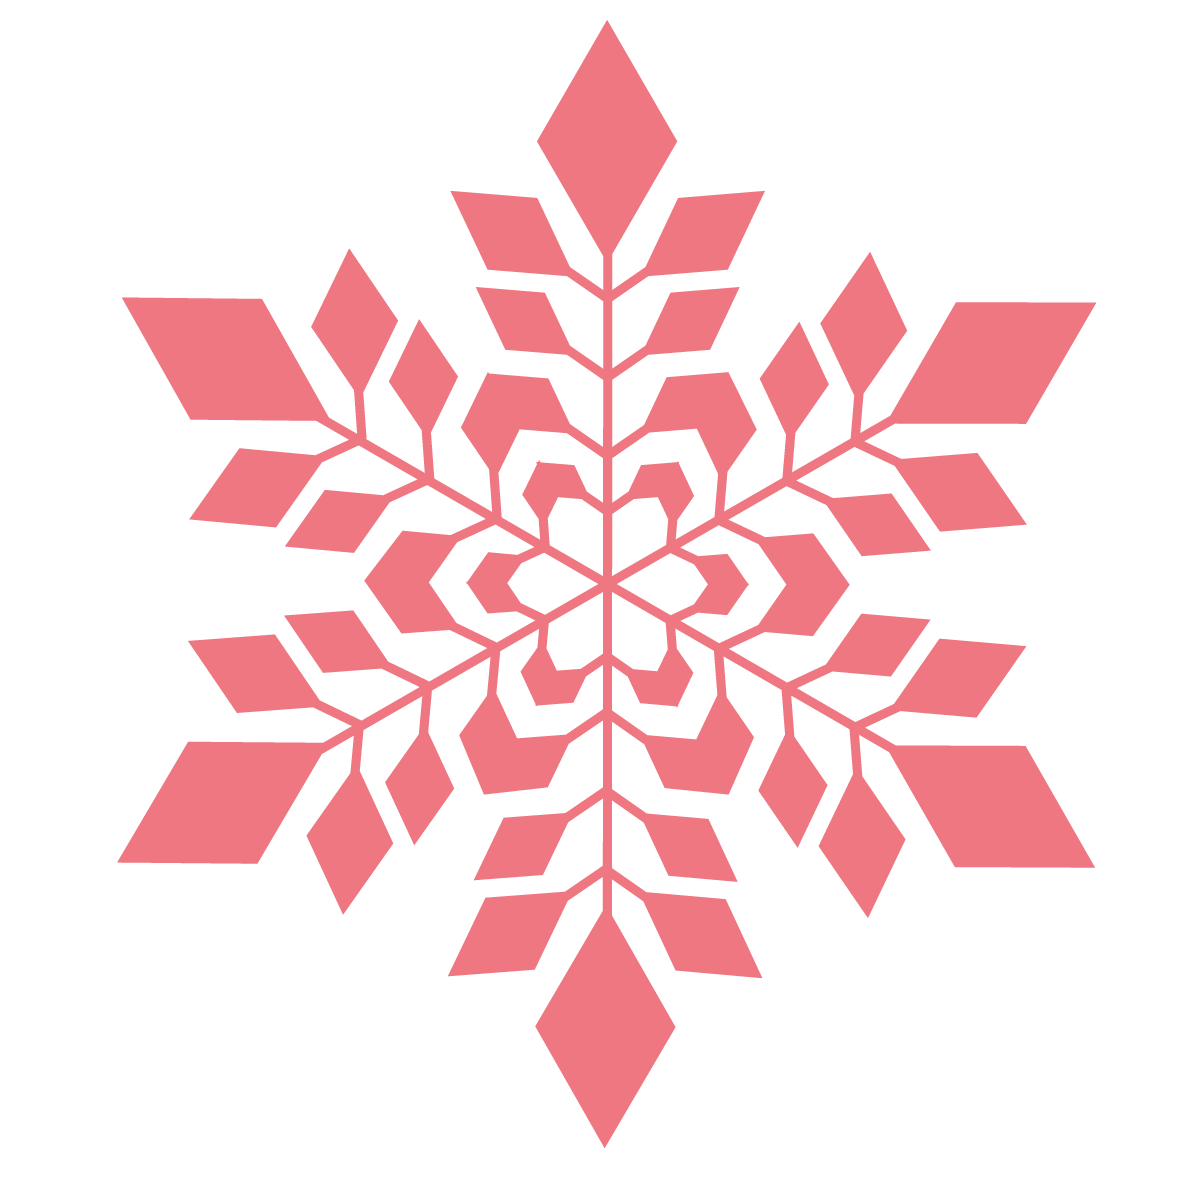  collection of png. Snowflake clipart red